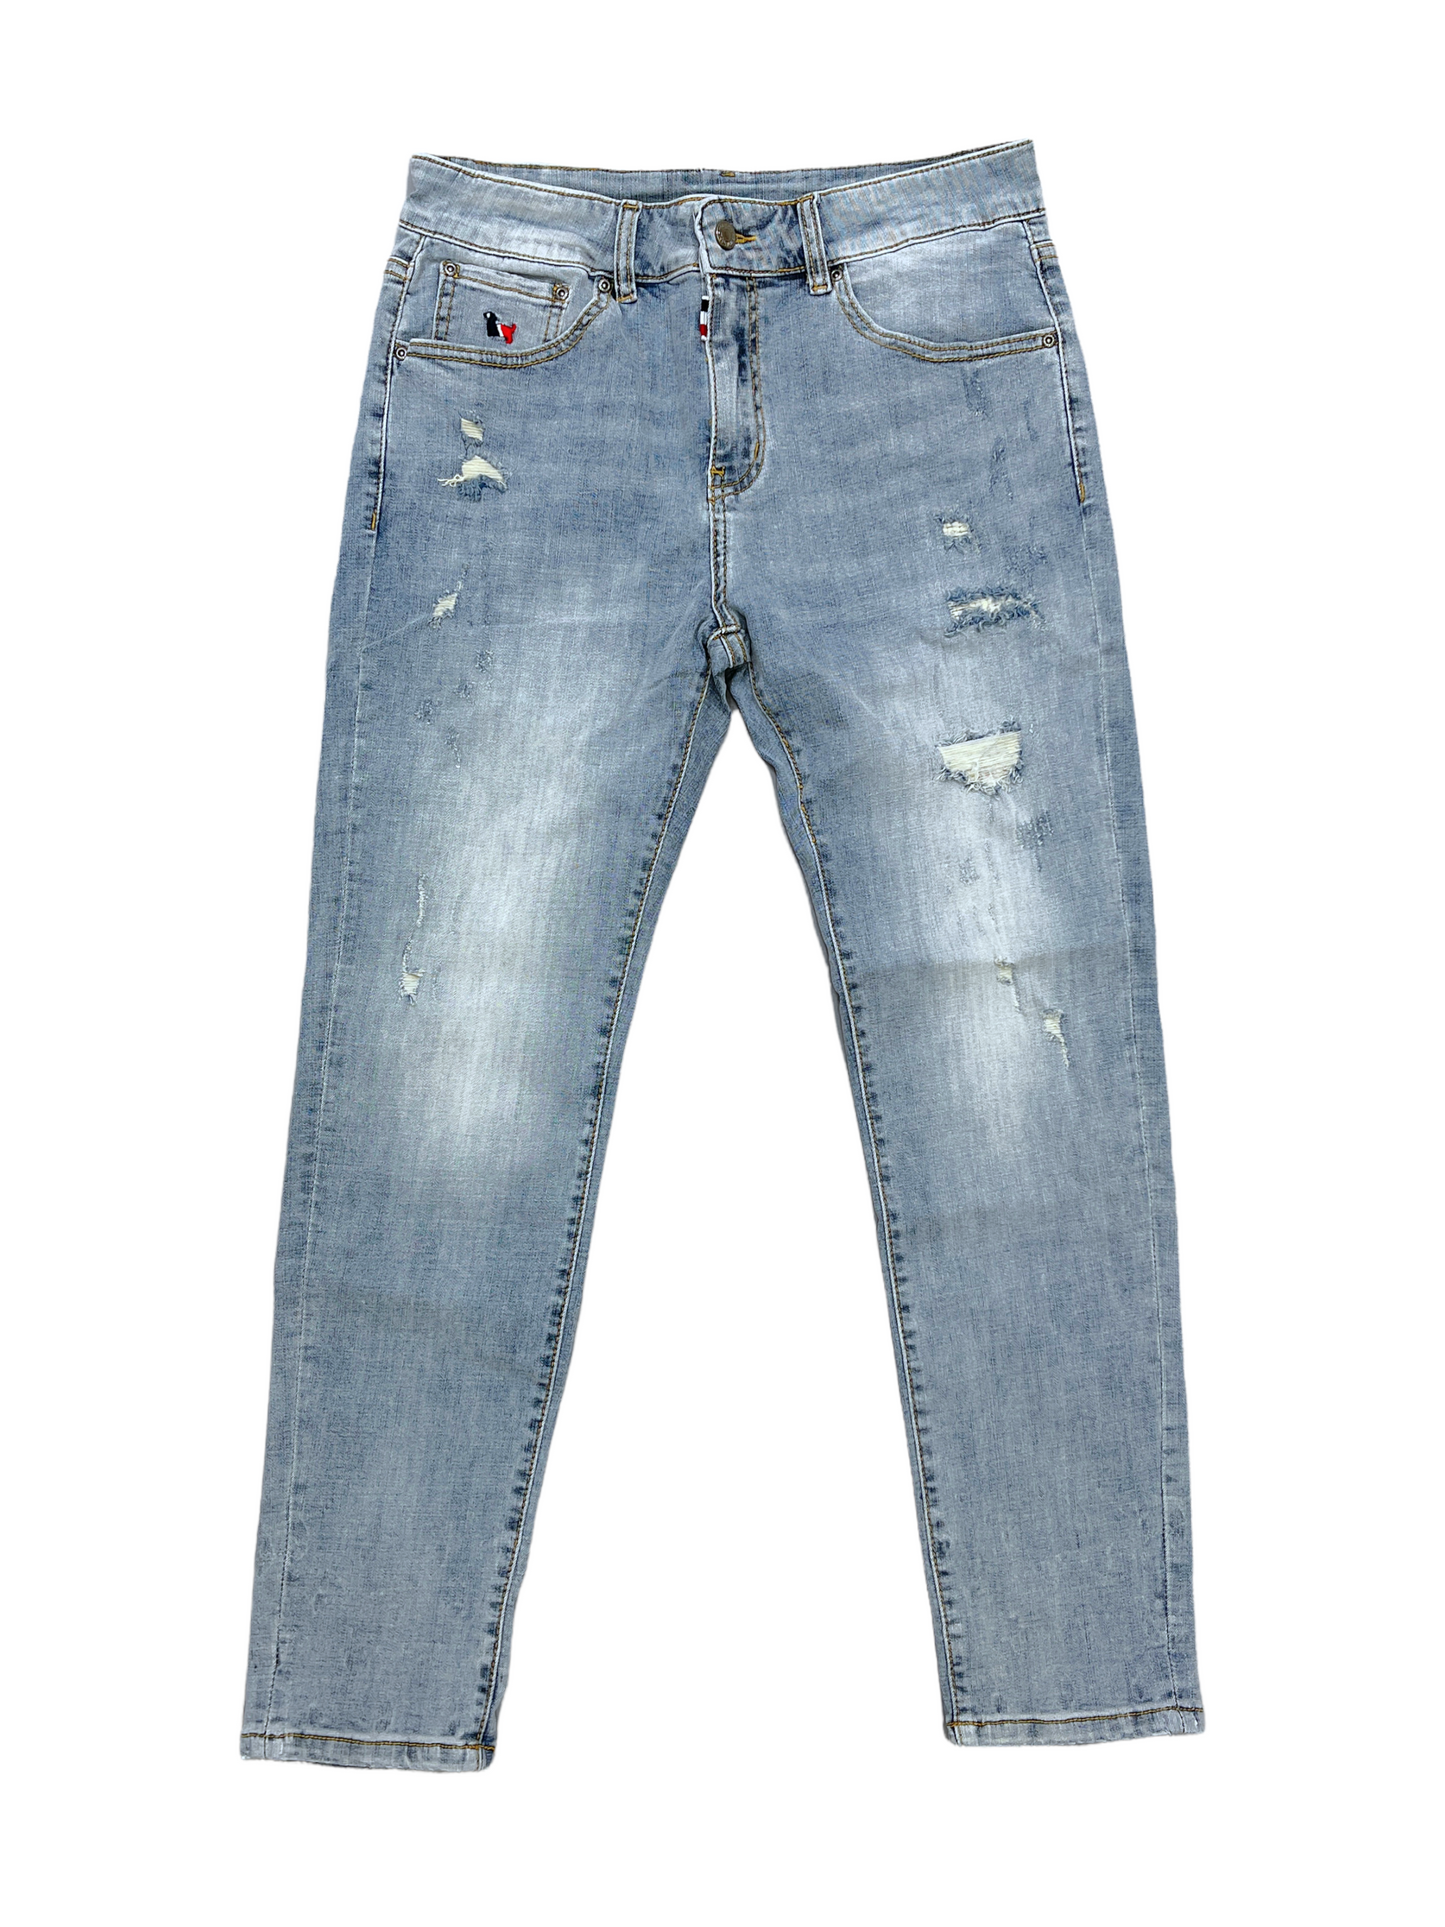 Thom Browne Light Wash Distressed Jeans 34 x 32 - Genuine Design luxury consignment Calgary, Alberta, Canada New and pre-owned clothing, shoes, accessories.